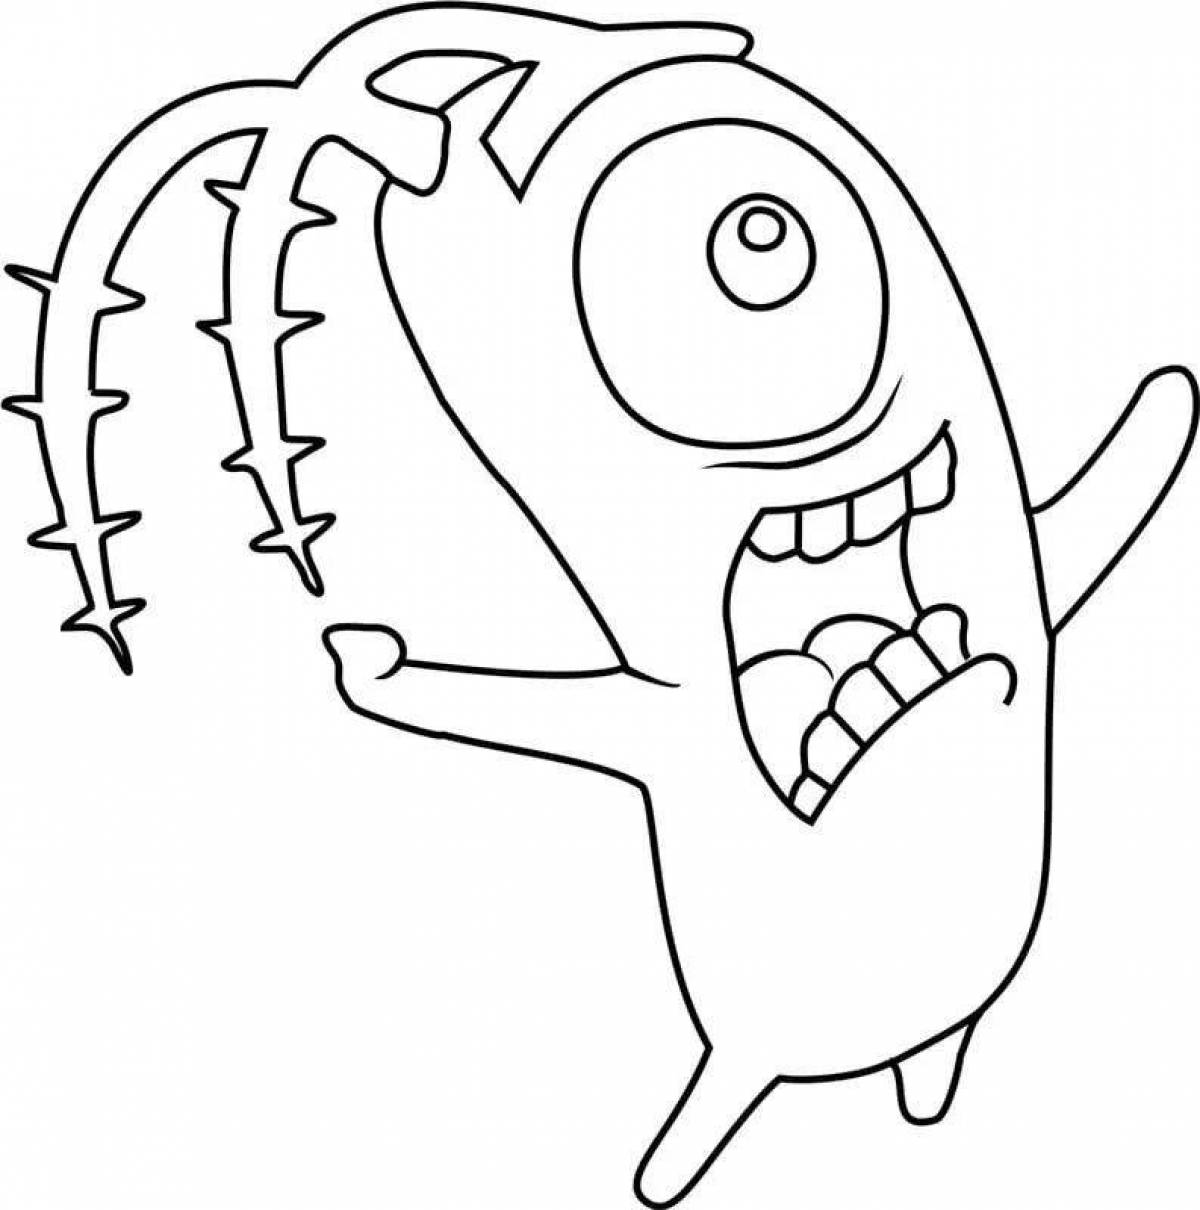 Animated plankton coloring page